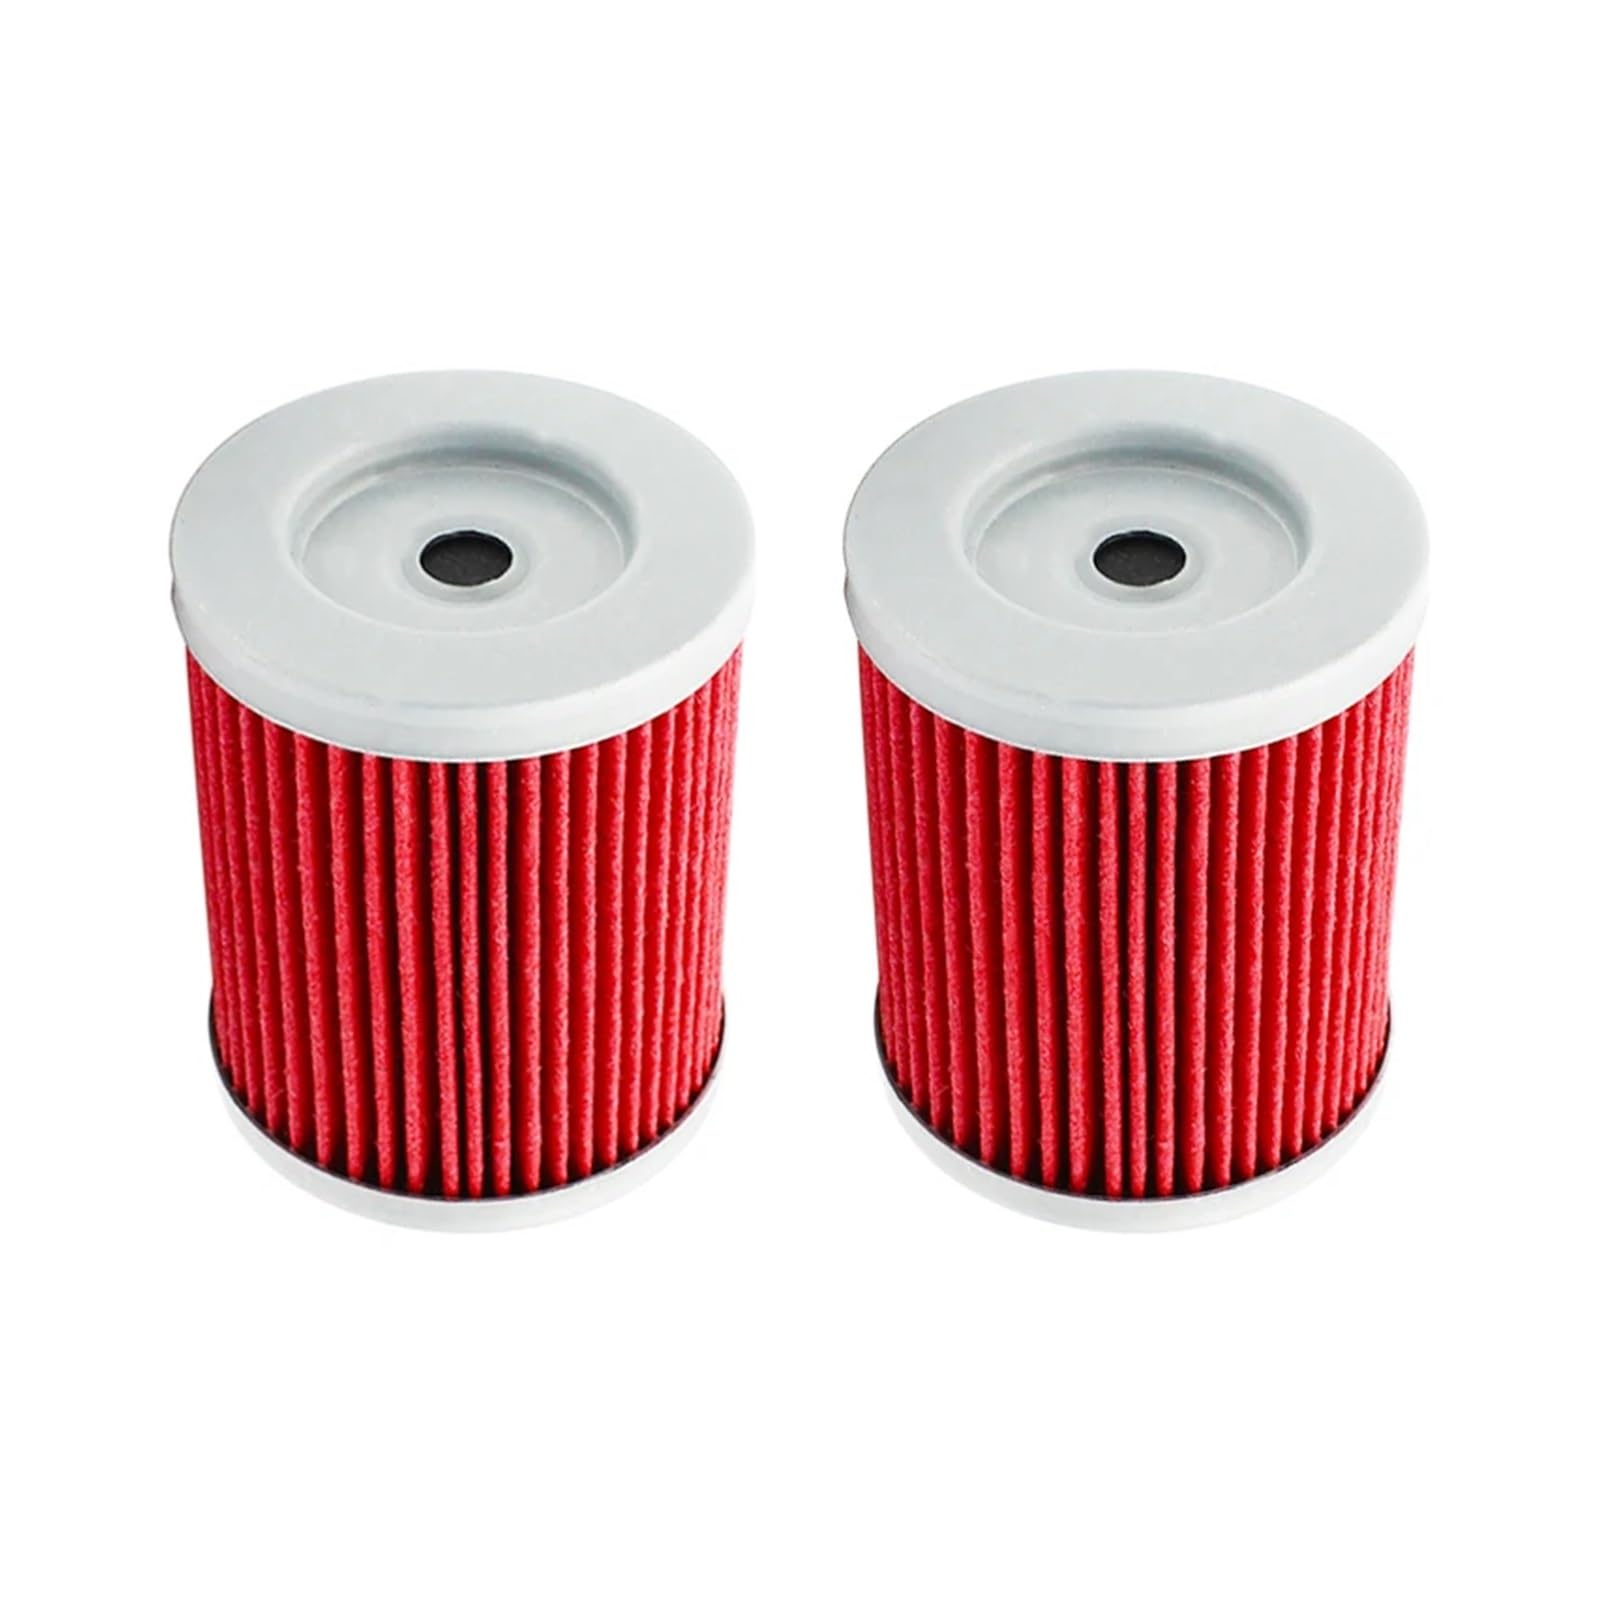 Motorrad Ölfilter for CP250 CP 250 Morphous Majesty YP250 YP 250 Grand YP400 Xmax YP 400 XM,ax 04-19(2pcs-red) von HBNING